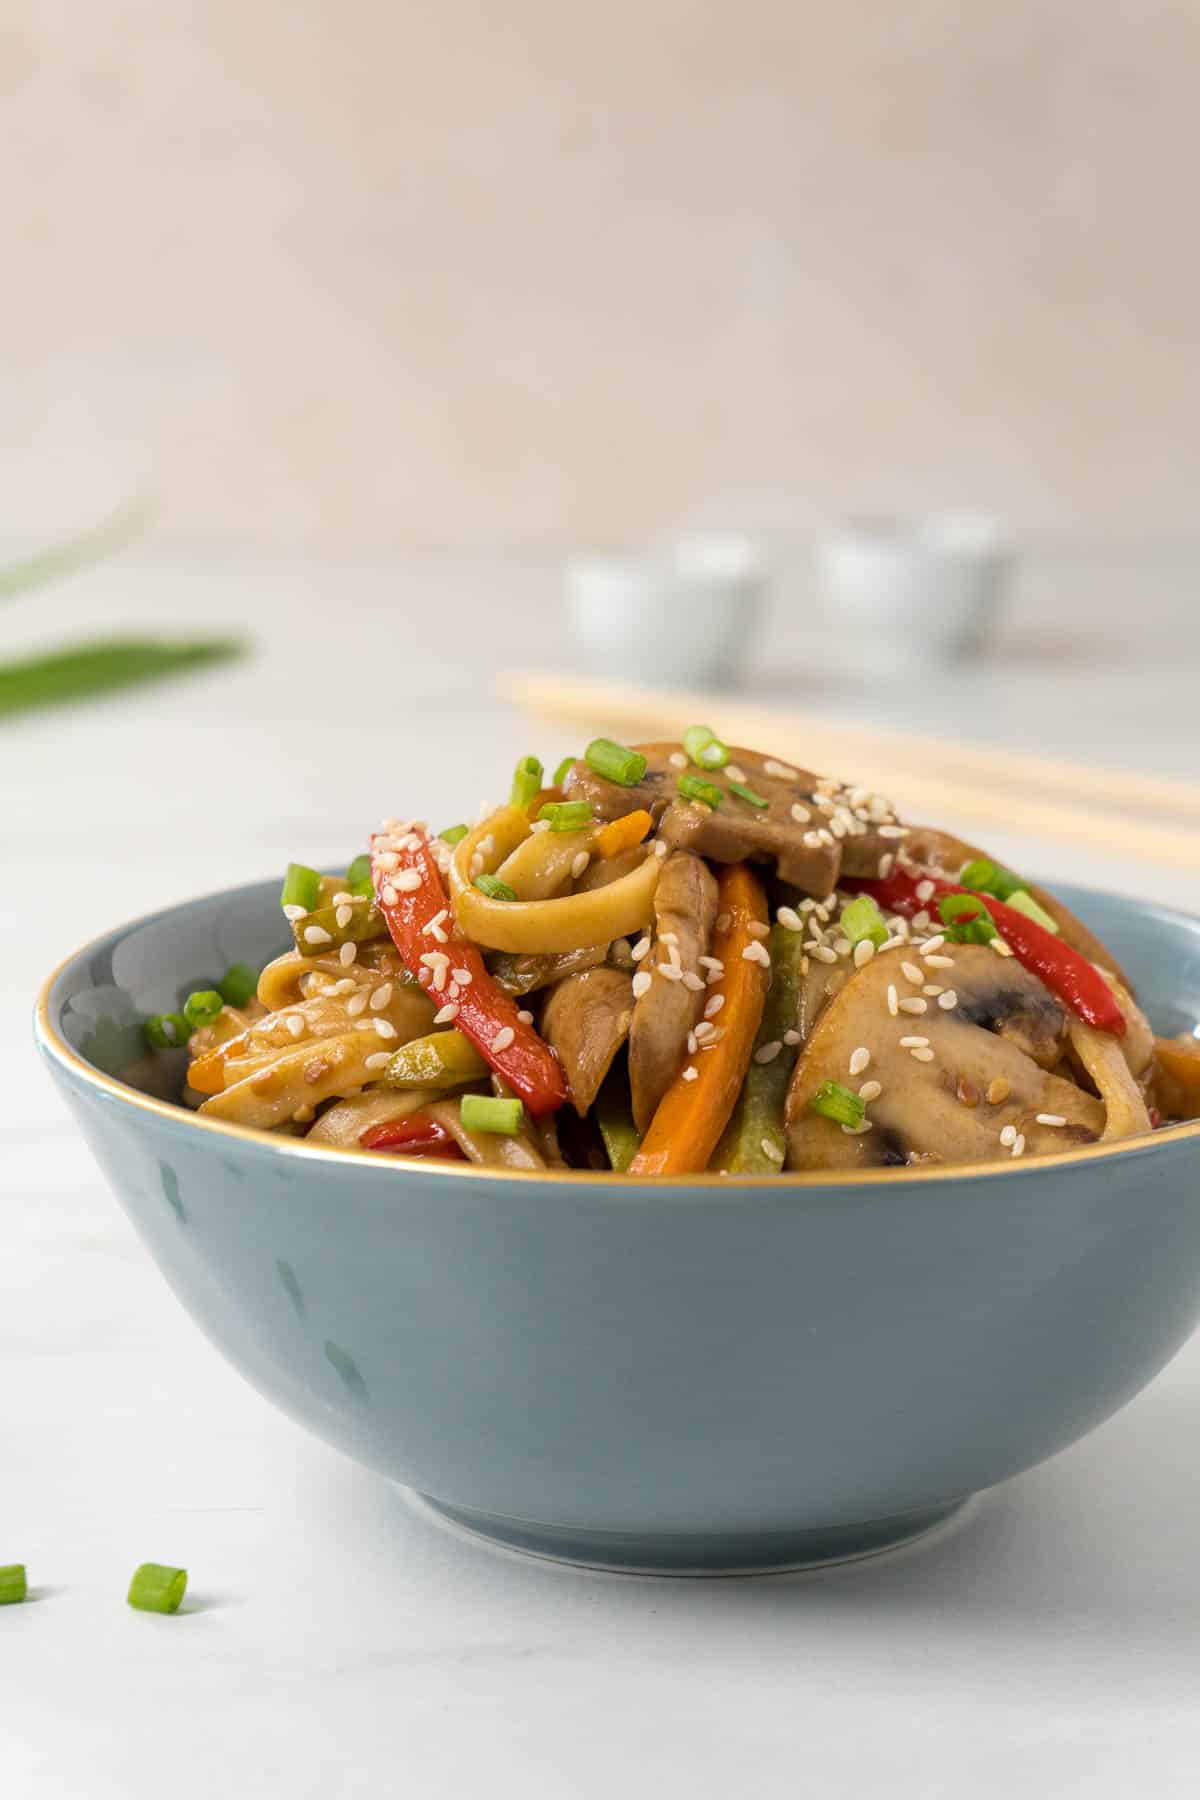 Asian vegetable pasta in a blue bowl. Carrots, red pepper, mushrooms and sesame seeds are clearly visible in the pasta.